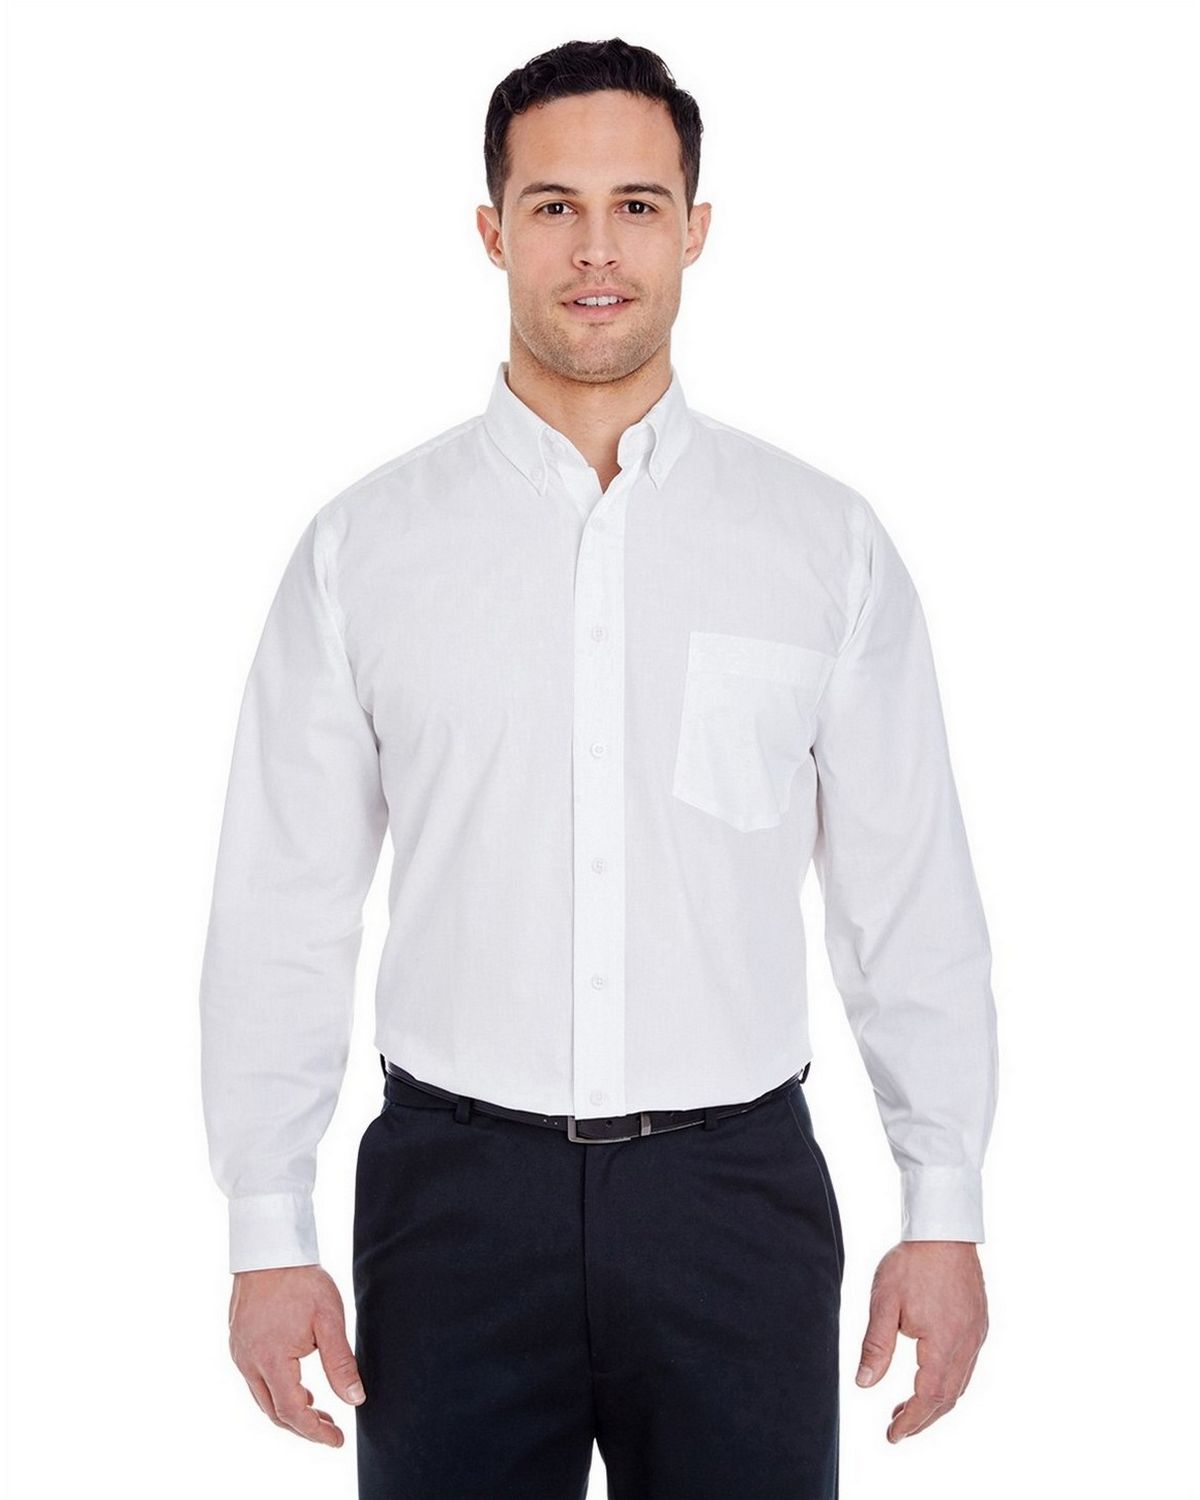 UltraClub 8355 Mens Easy-Care Broadcloth Button Down Shirt 